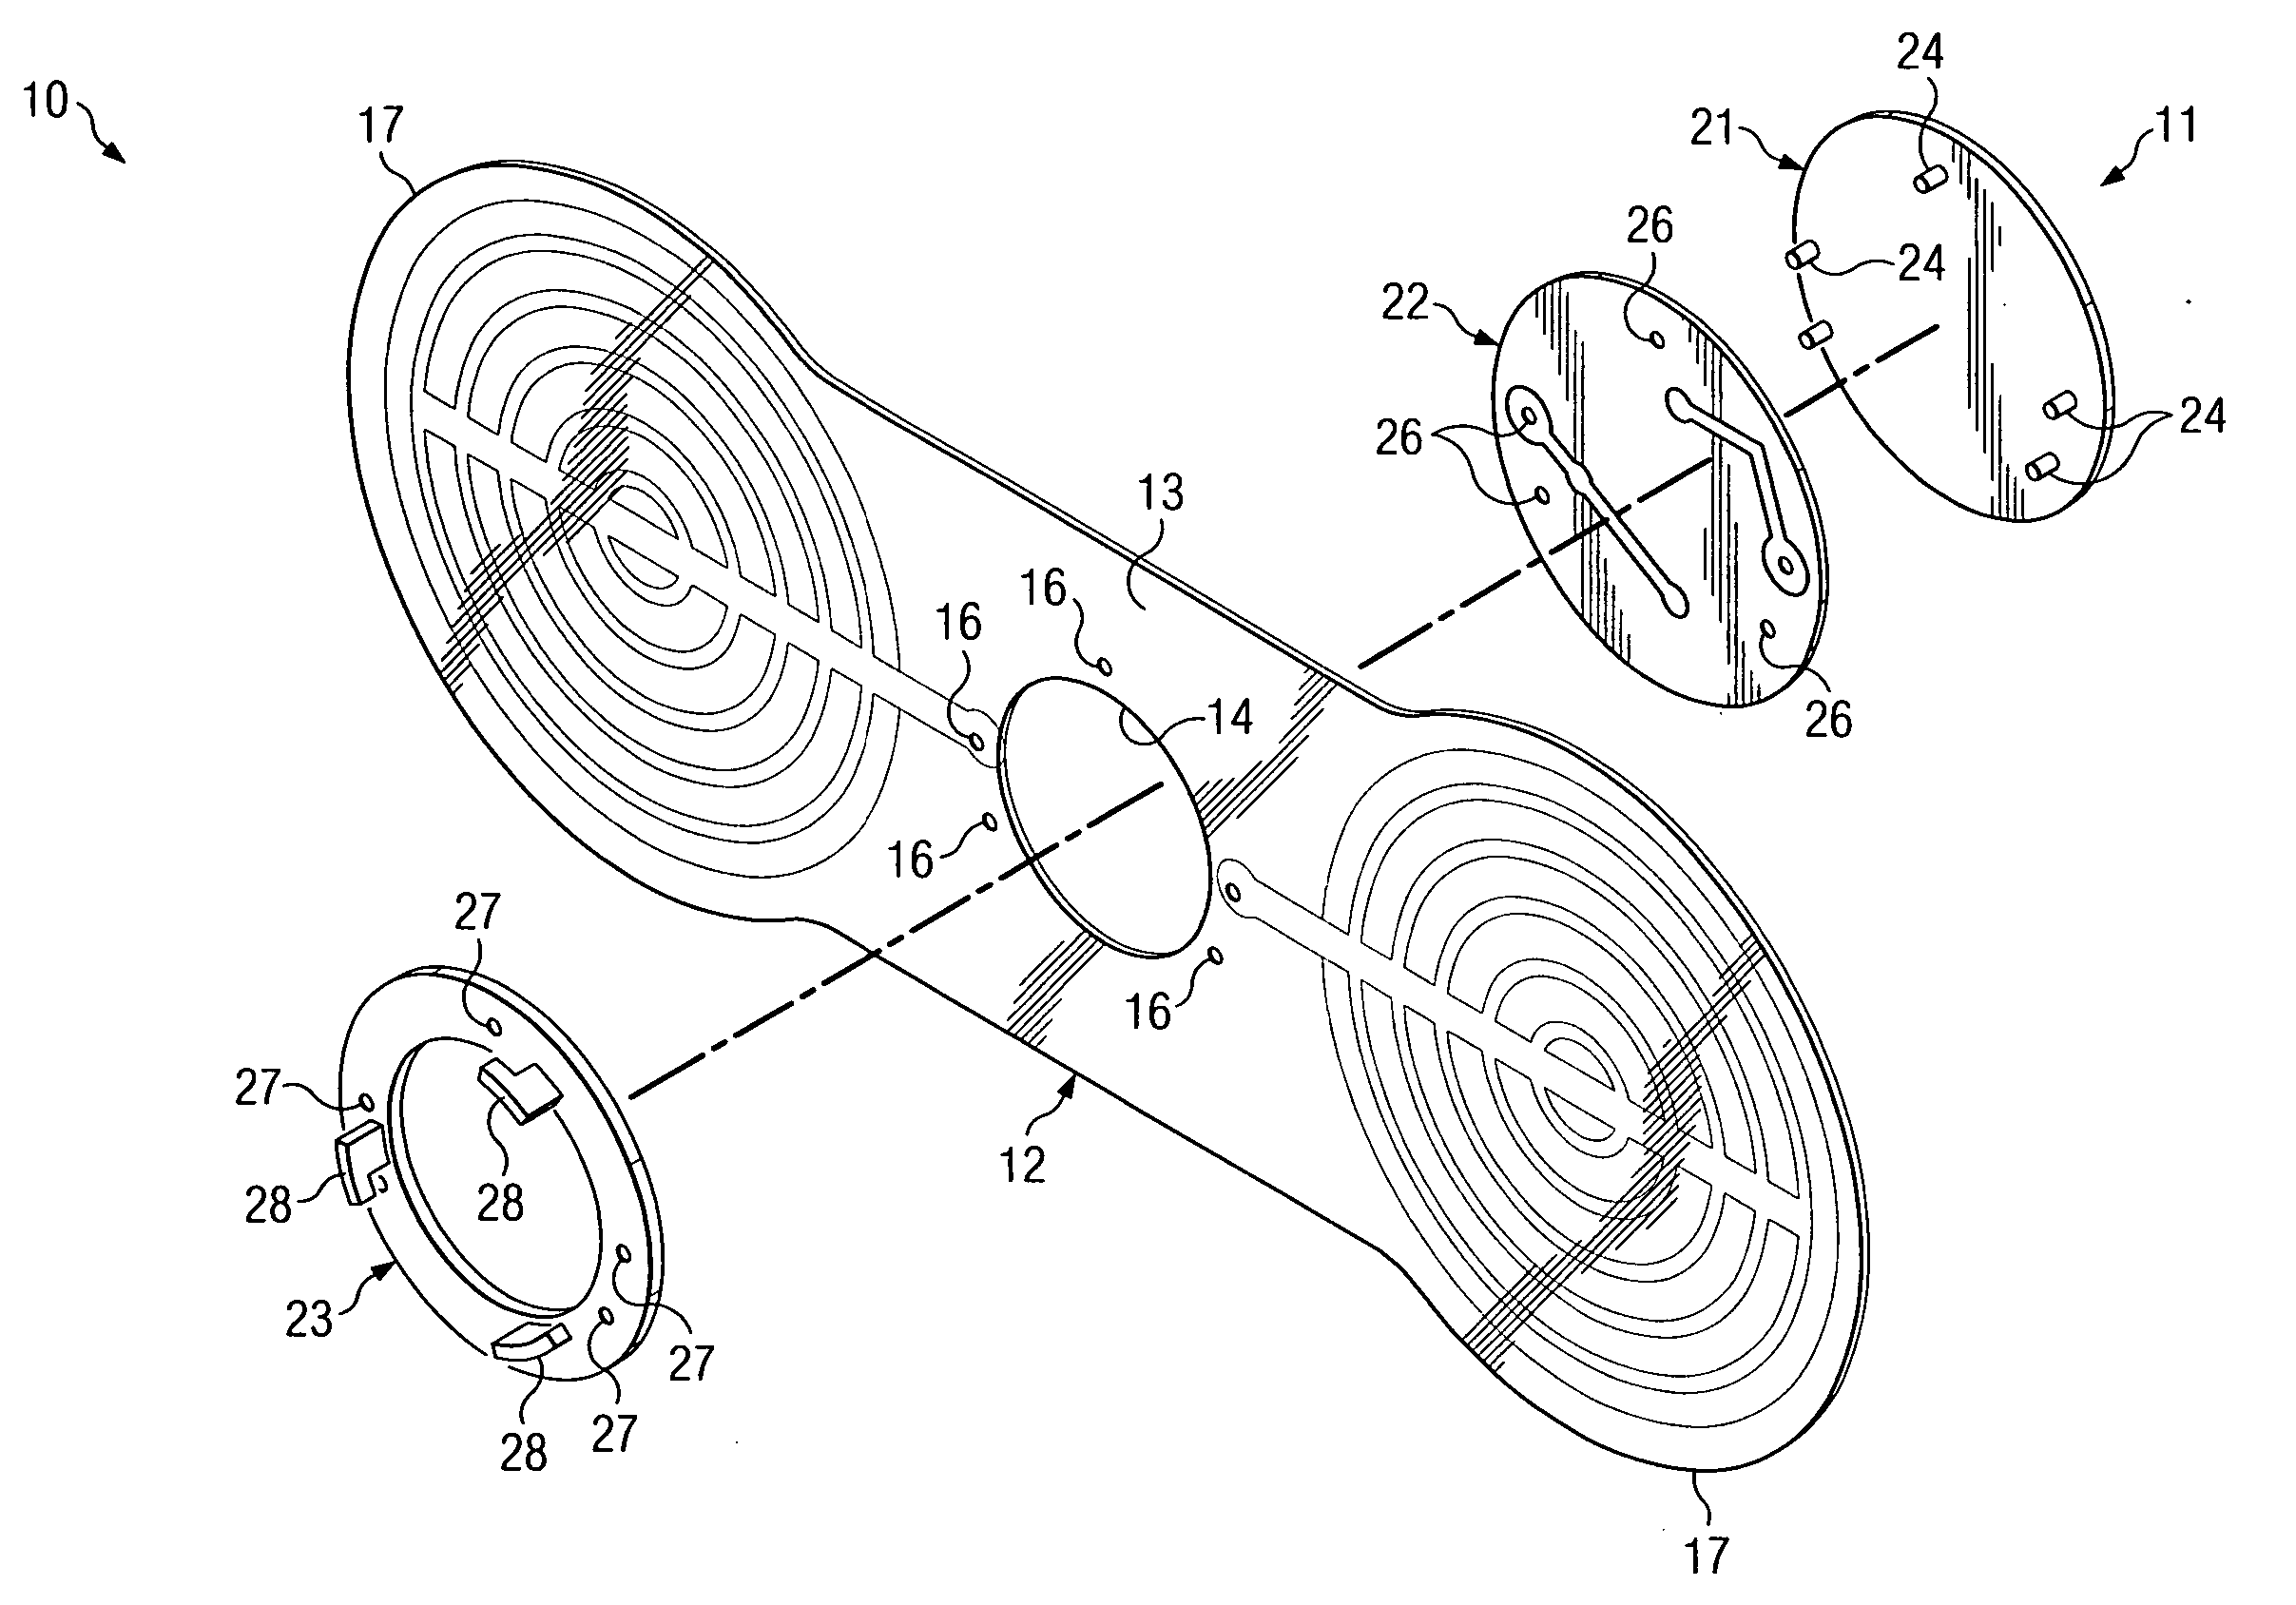 Conductive pad assembly for electrical therapy device